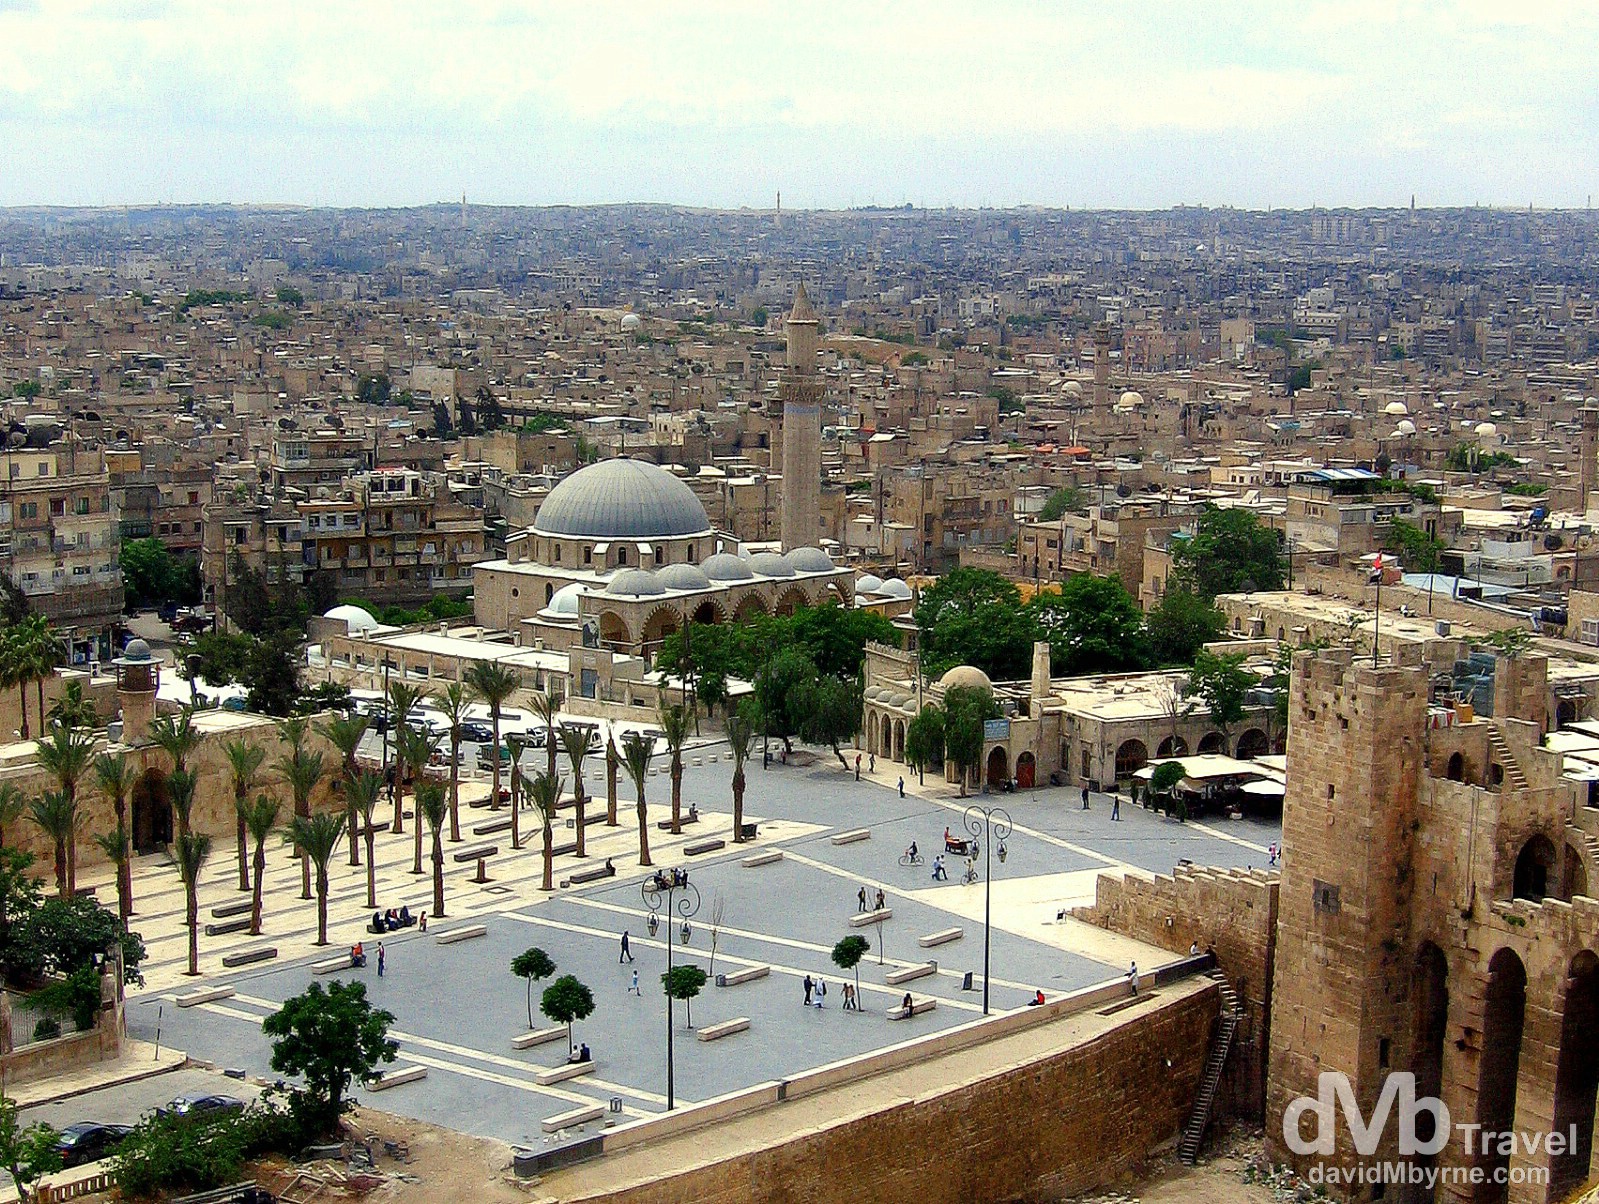 The Syrian city of Aleppo as seen from the walls of the city's fort. Aleppo, Syria. May 9, 2008.